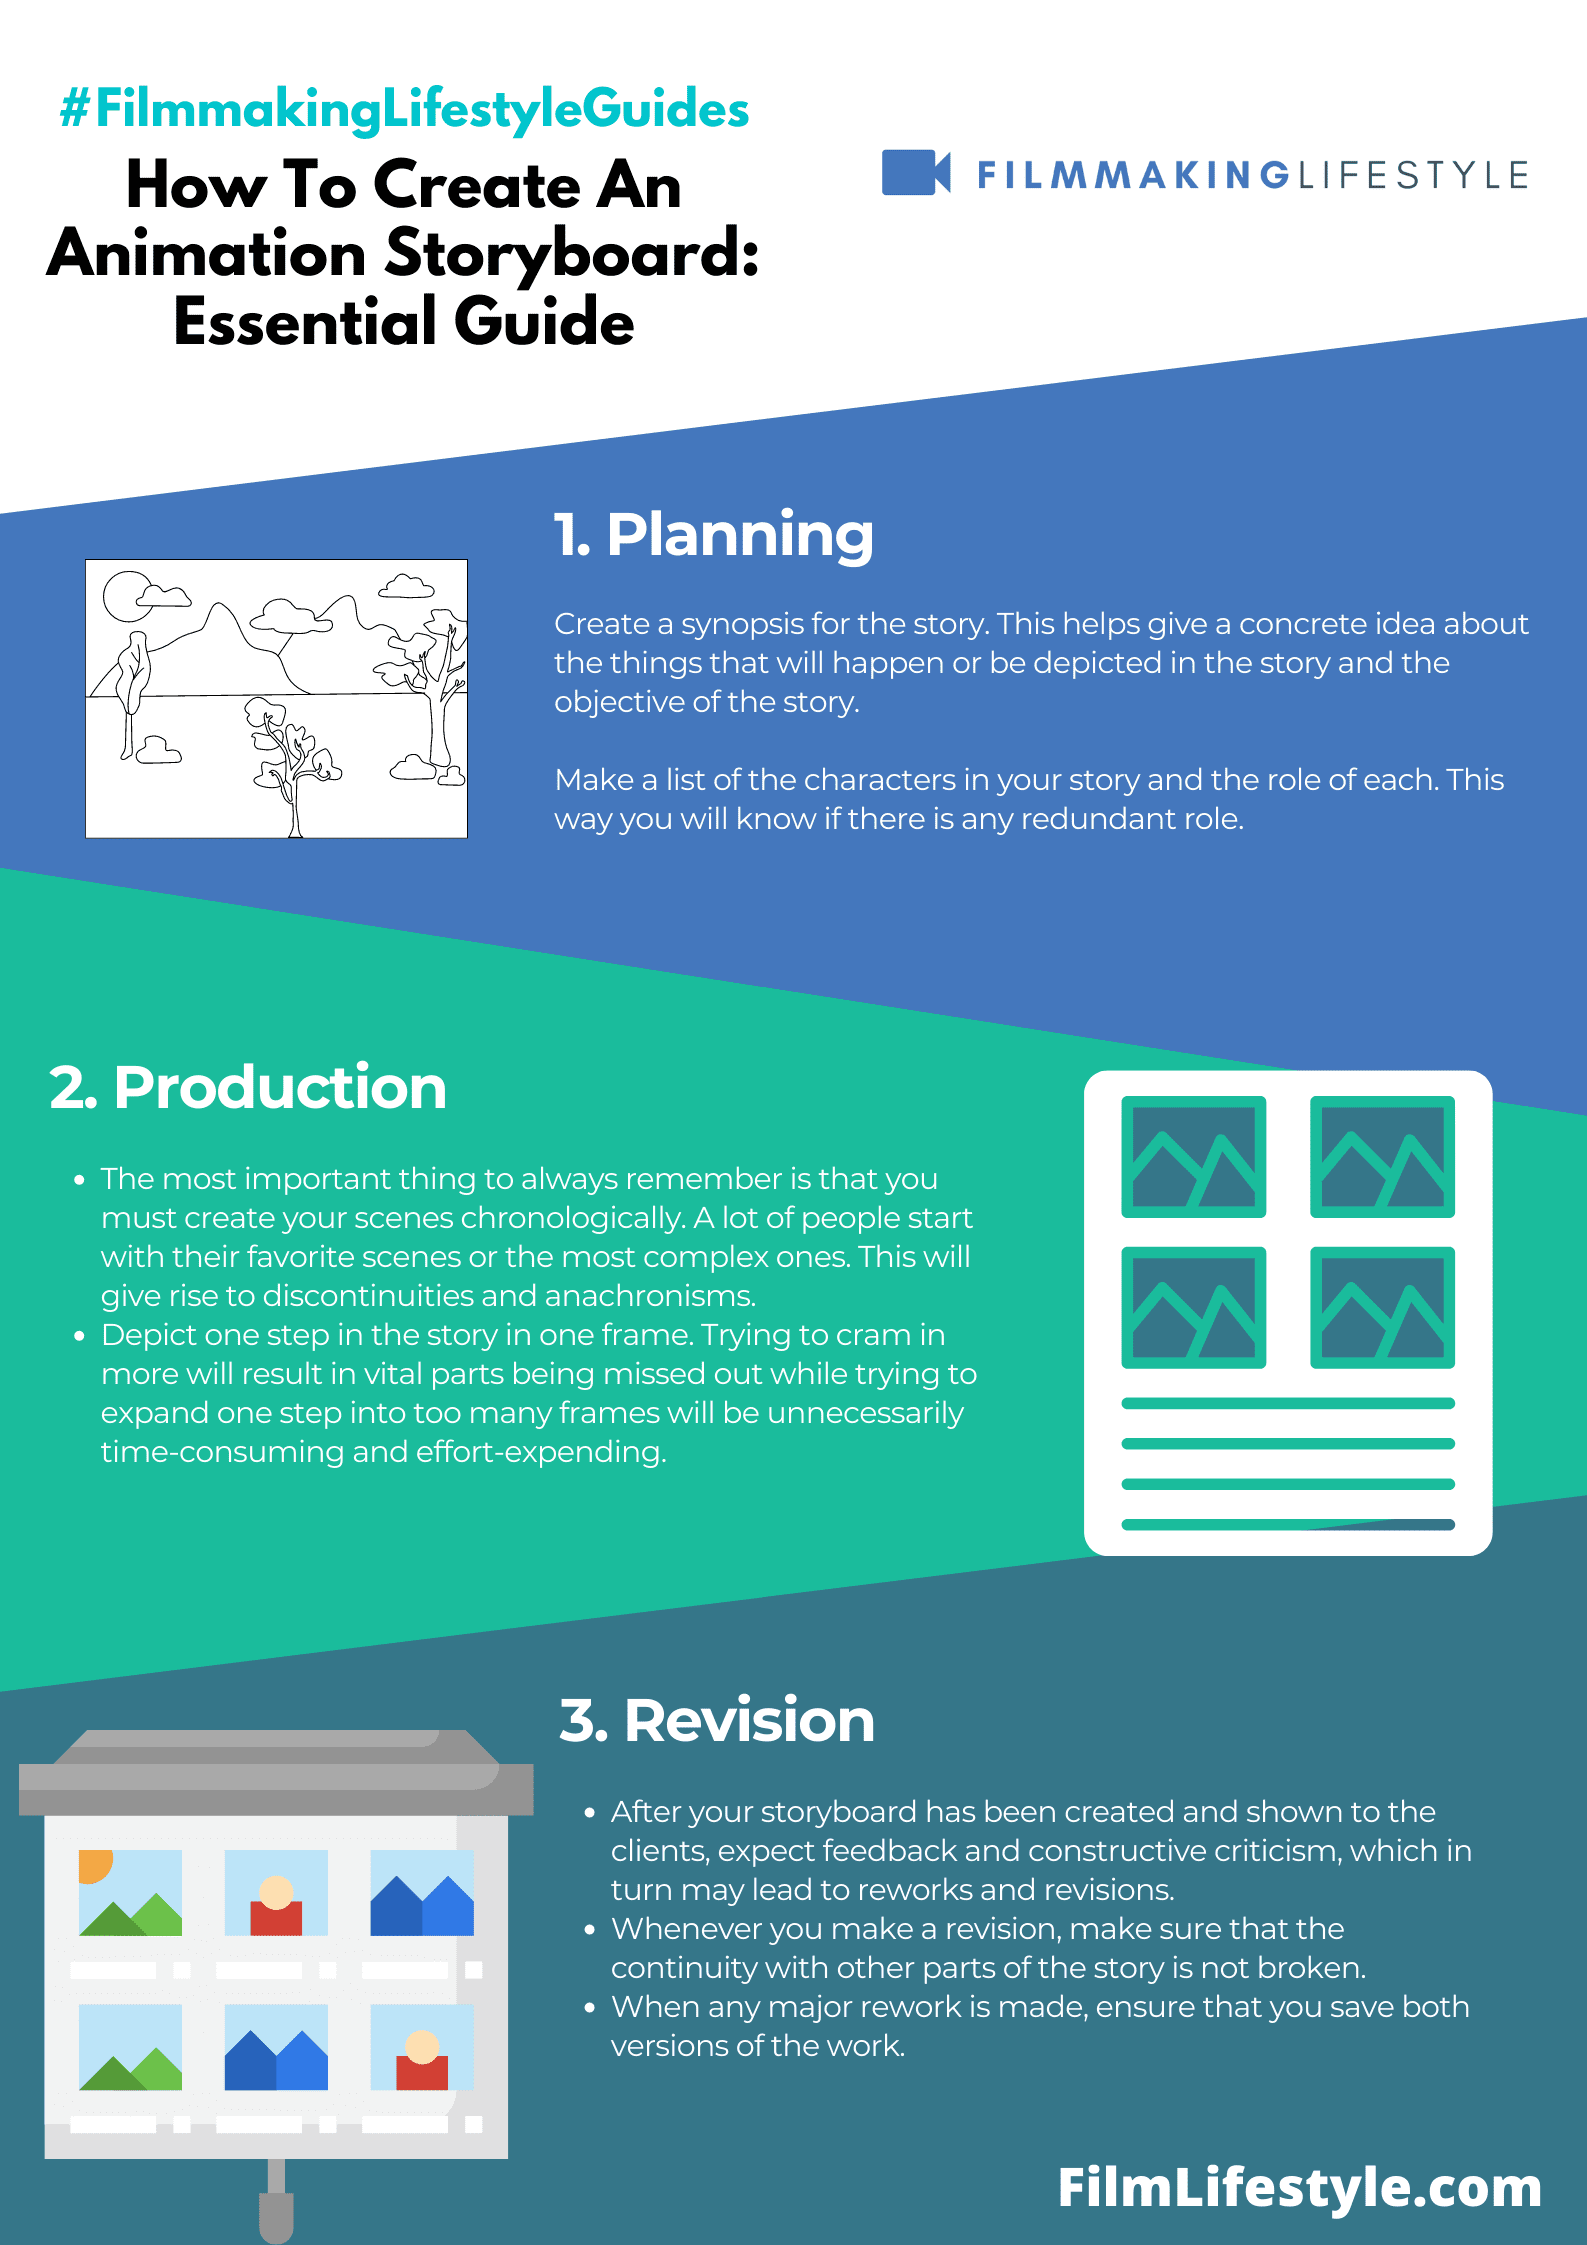 How To Create An Animation Storyboard